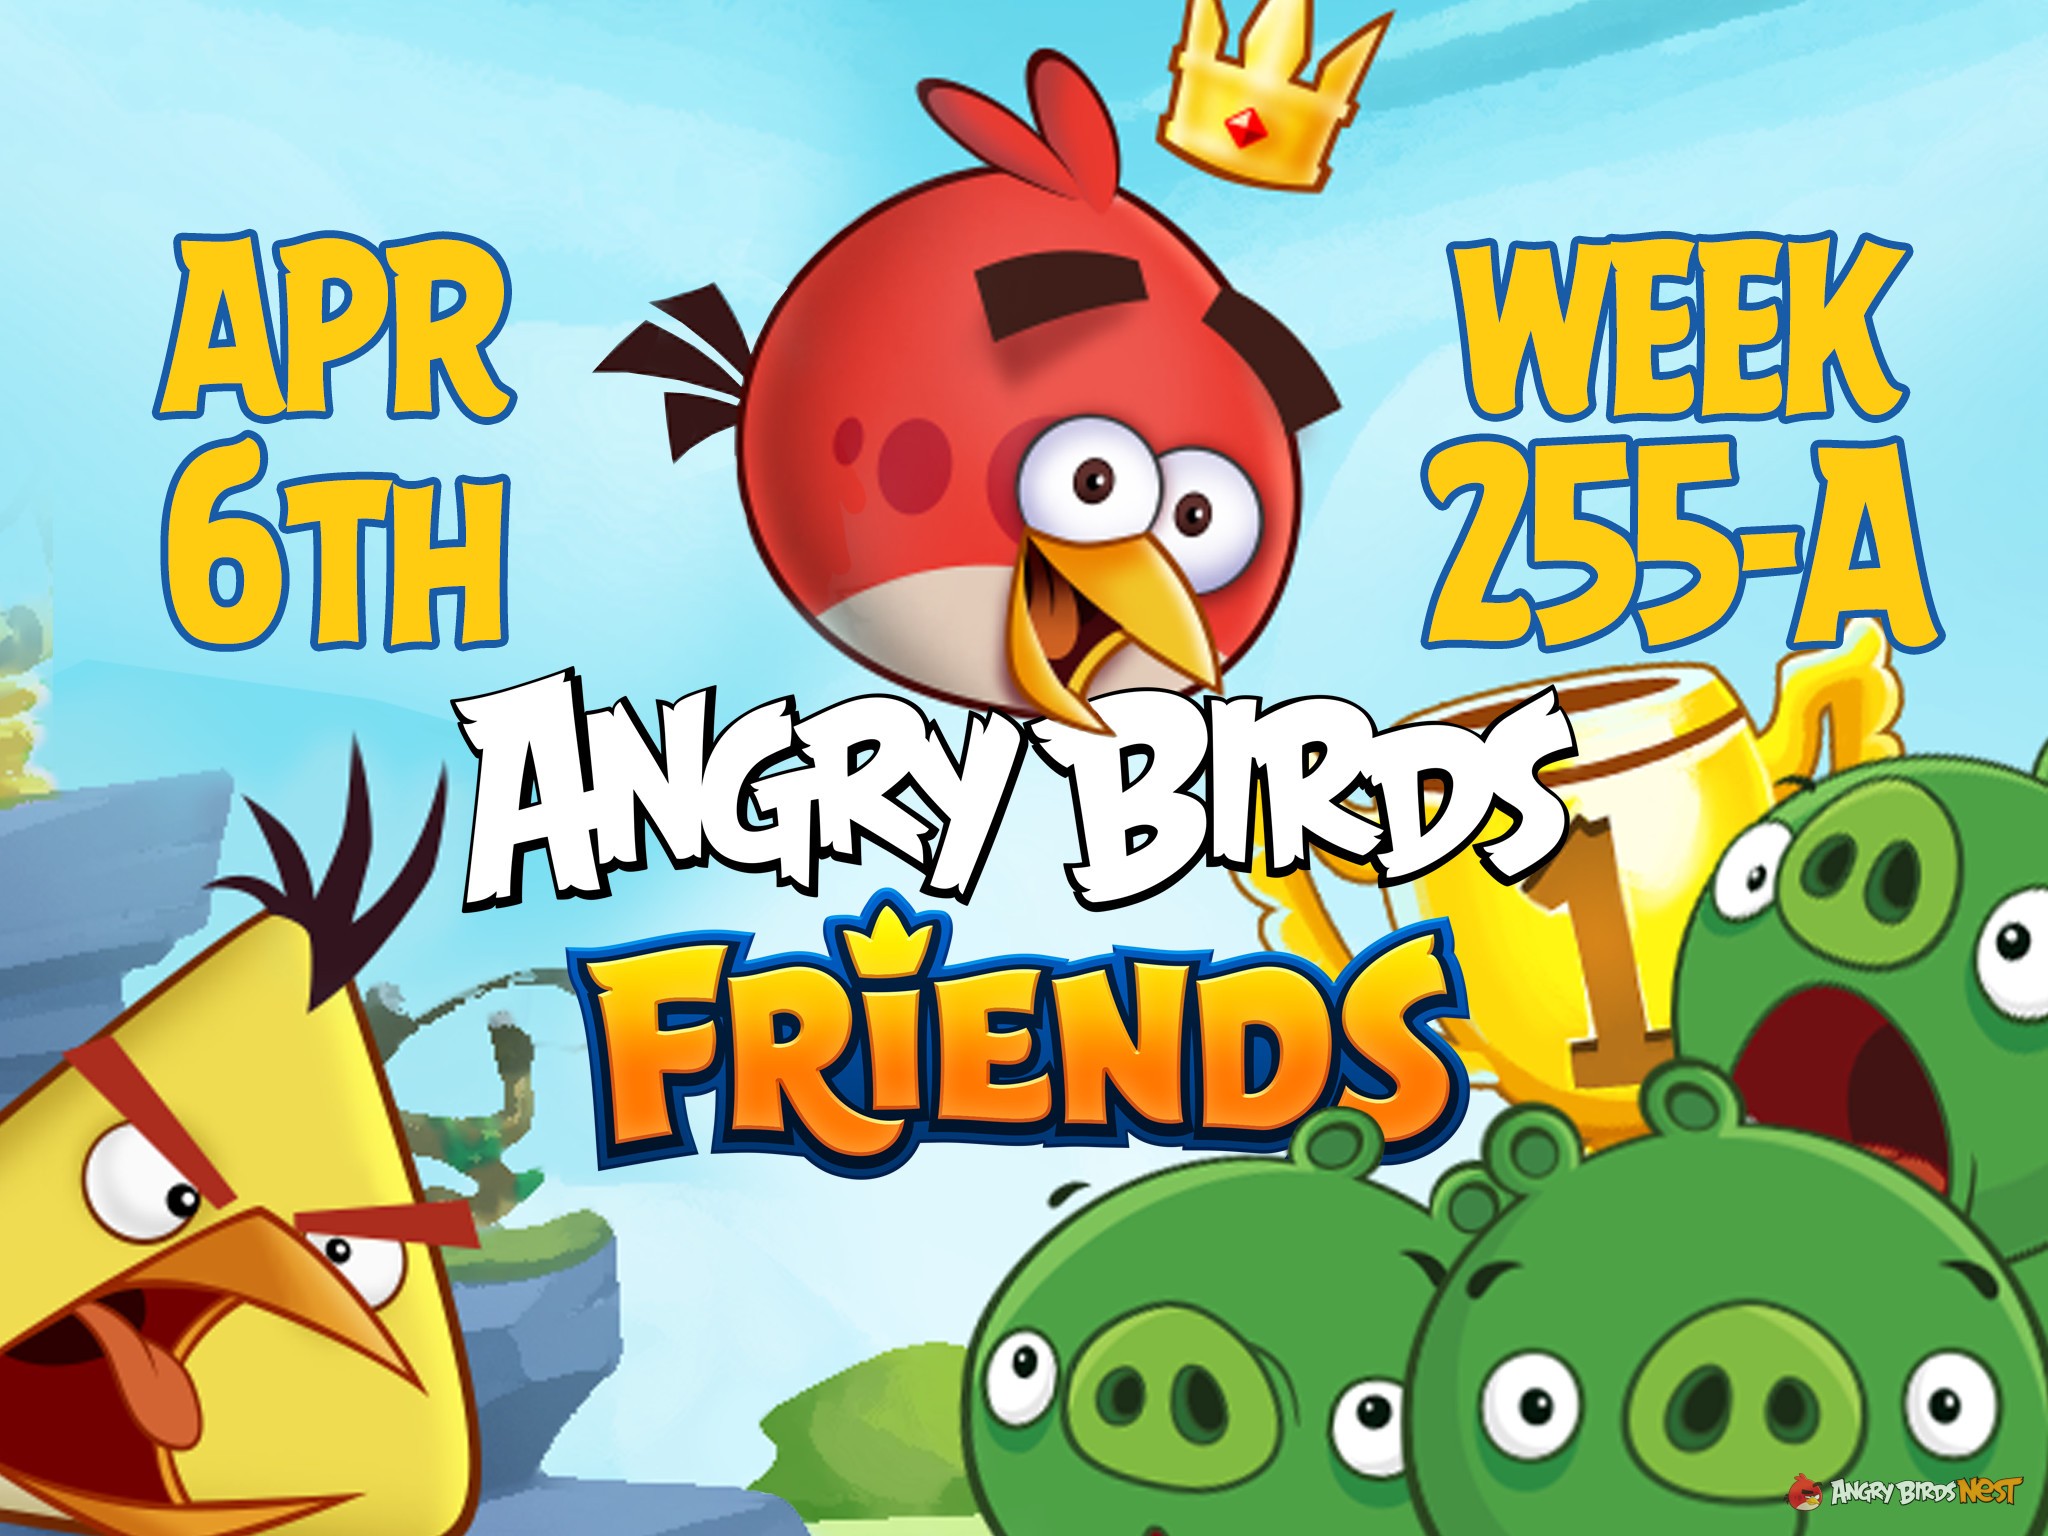 Angry Birds Friends Tournament Week 255-A Feature Image